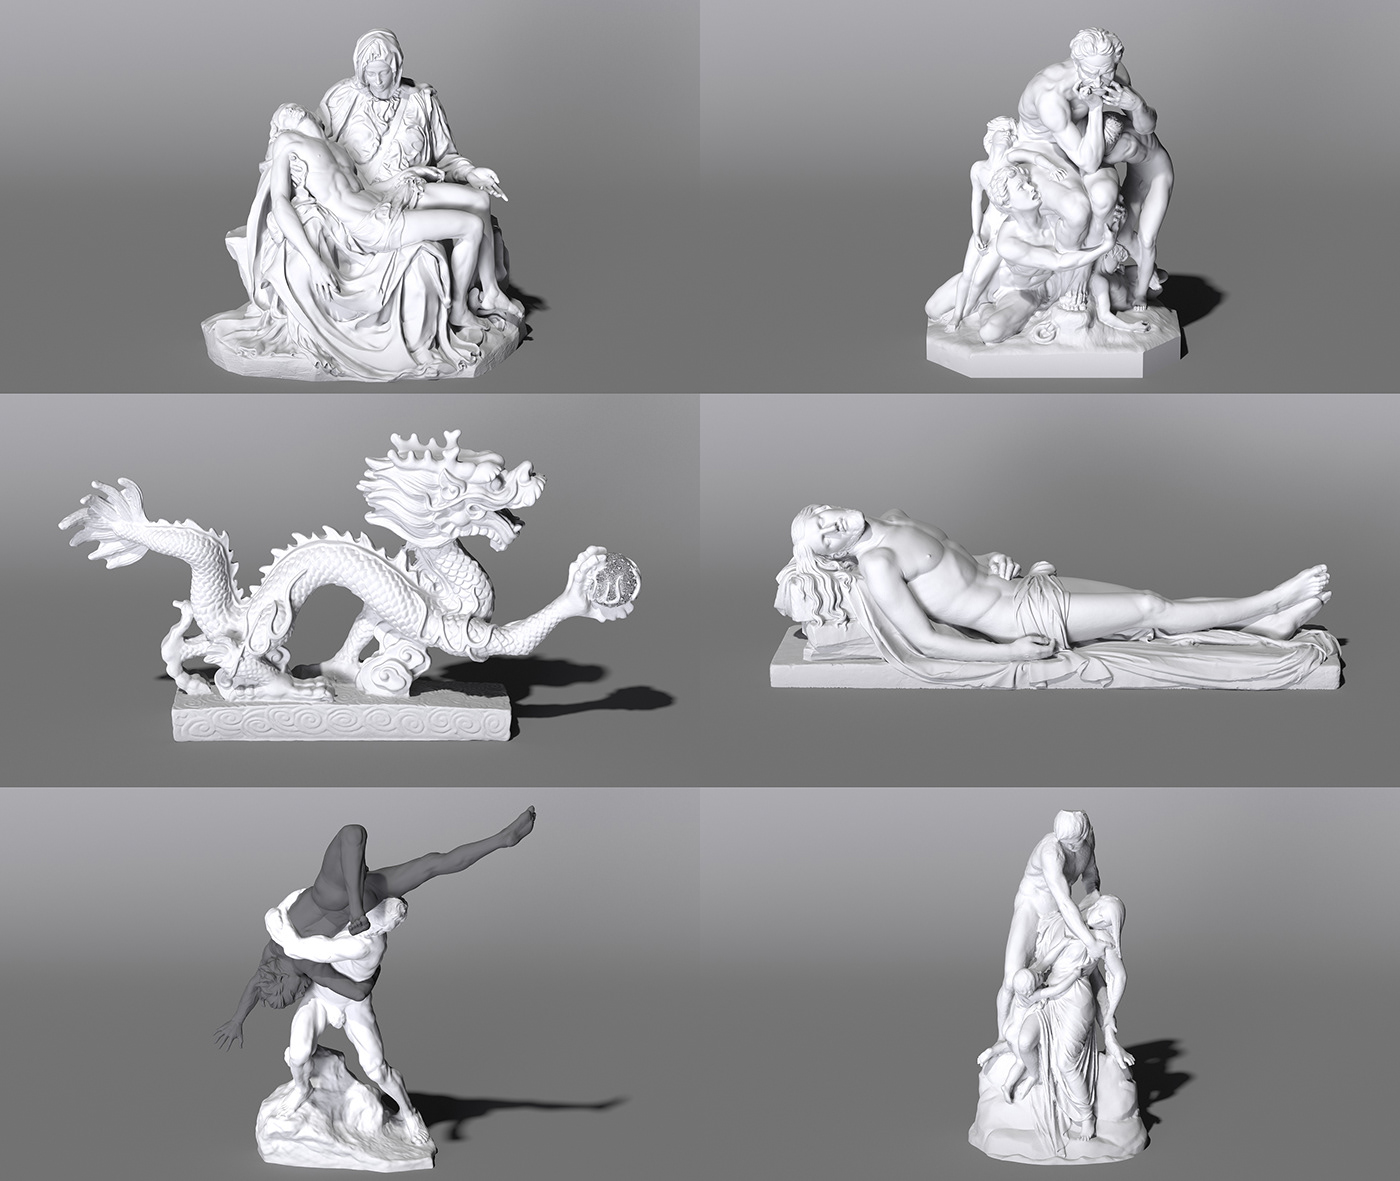 3D Sculptures After effect Coronavirus COVID19 Economic crisis global health threat new normal redshift render social awareness campaign The world is in crisis